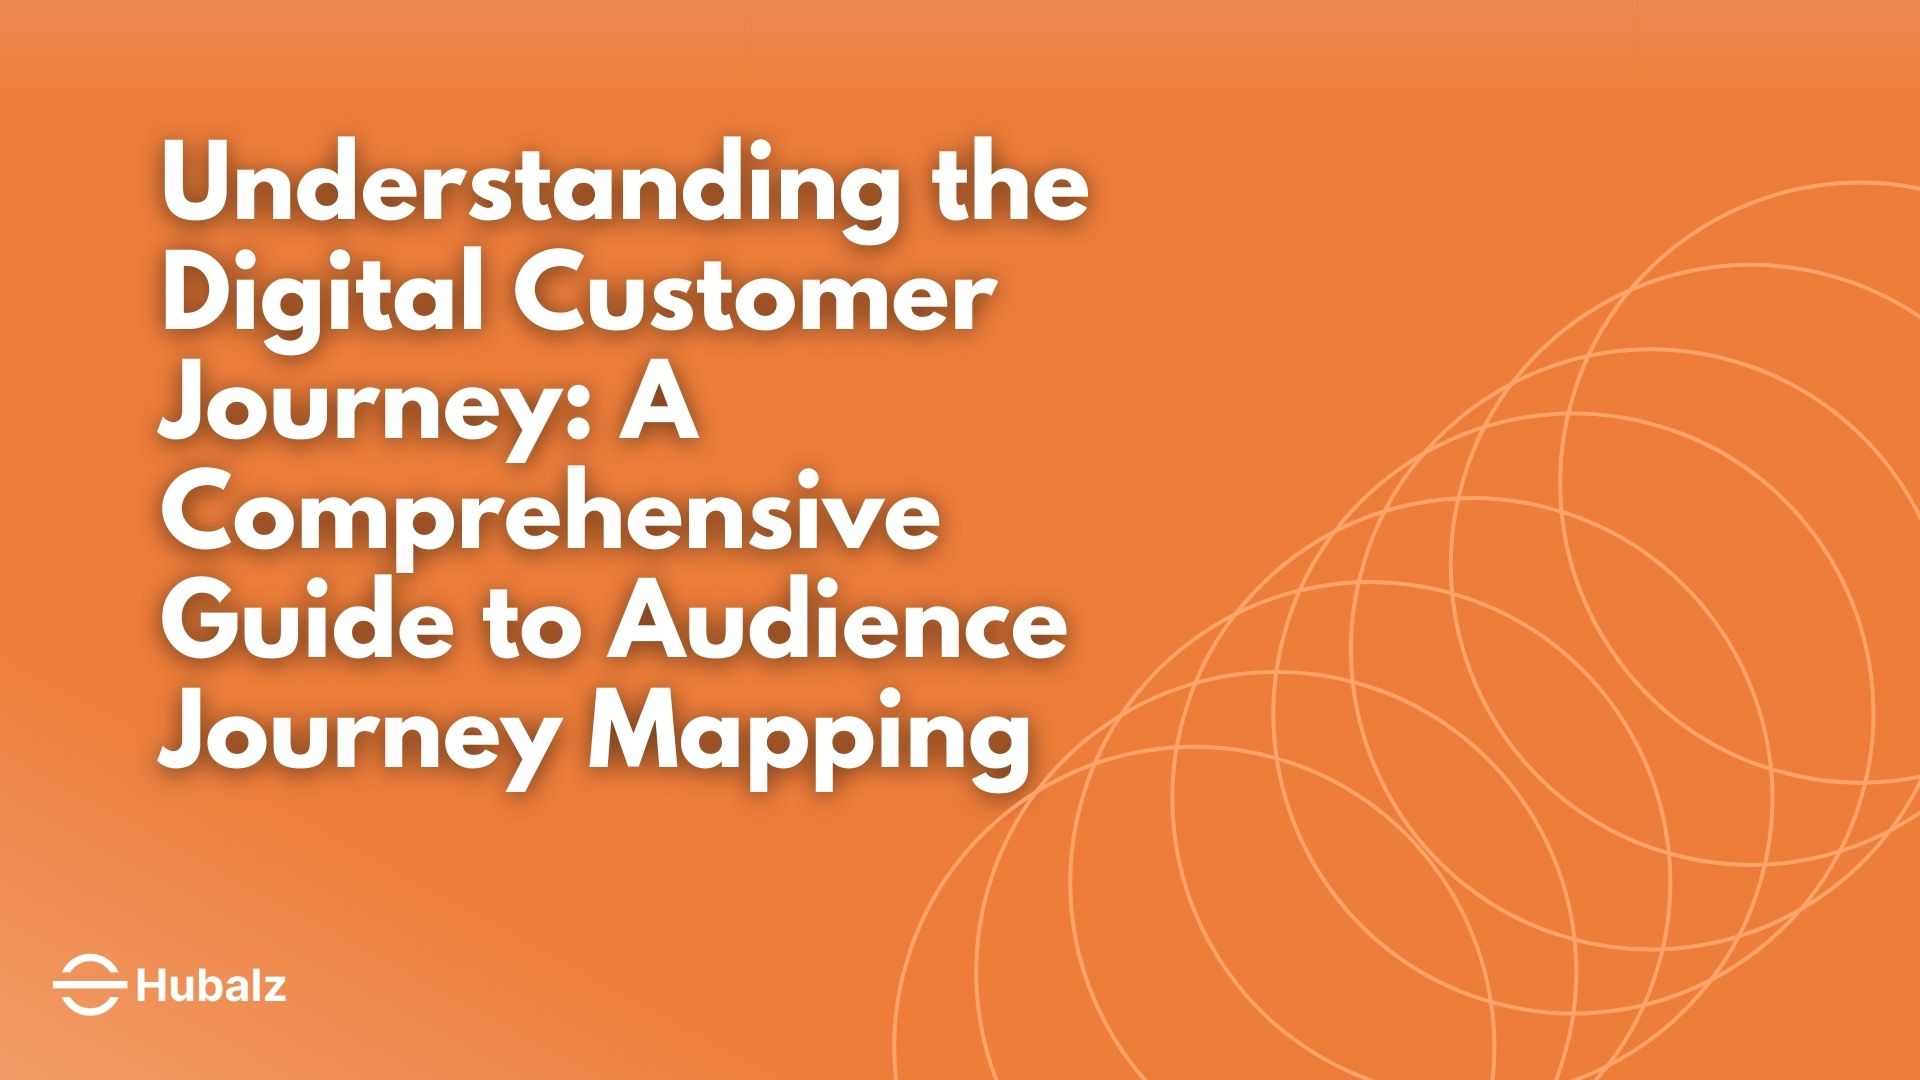 Understanding the Digital Customer Journey: A Comprehensive Guide to Audience Journey Mapping